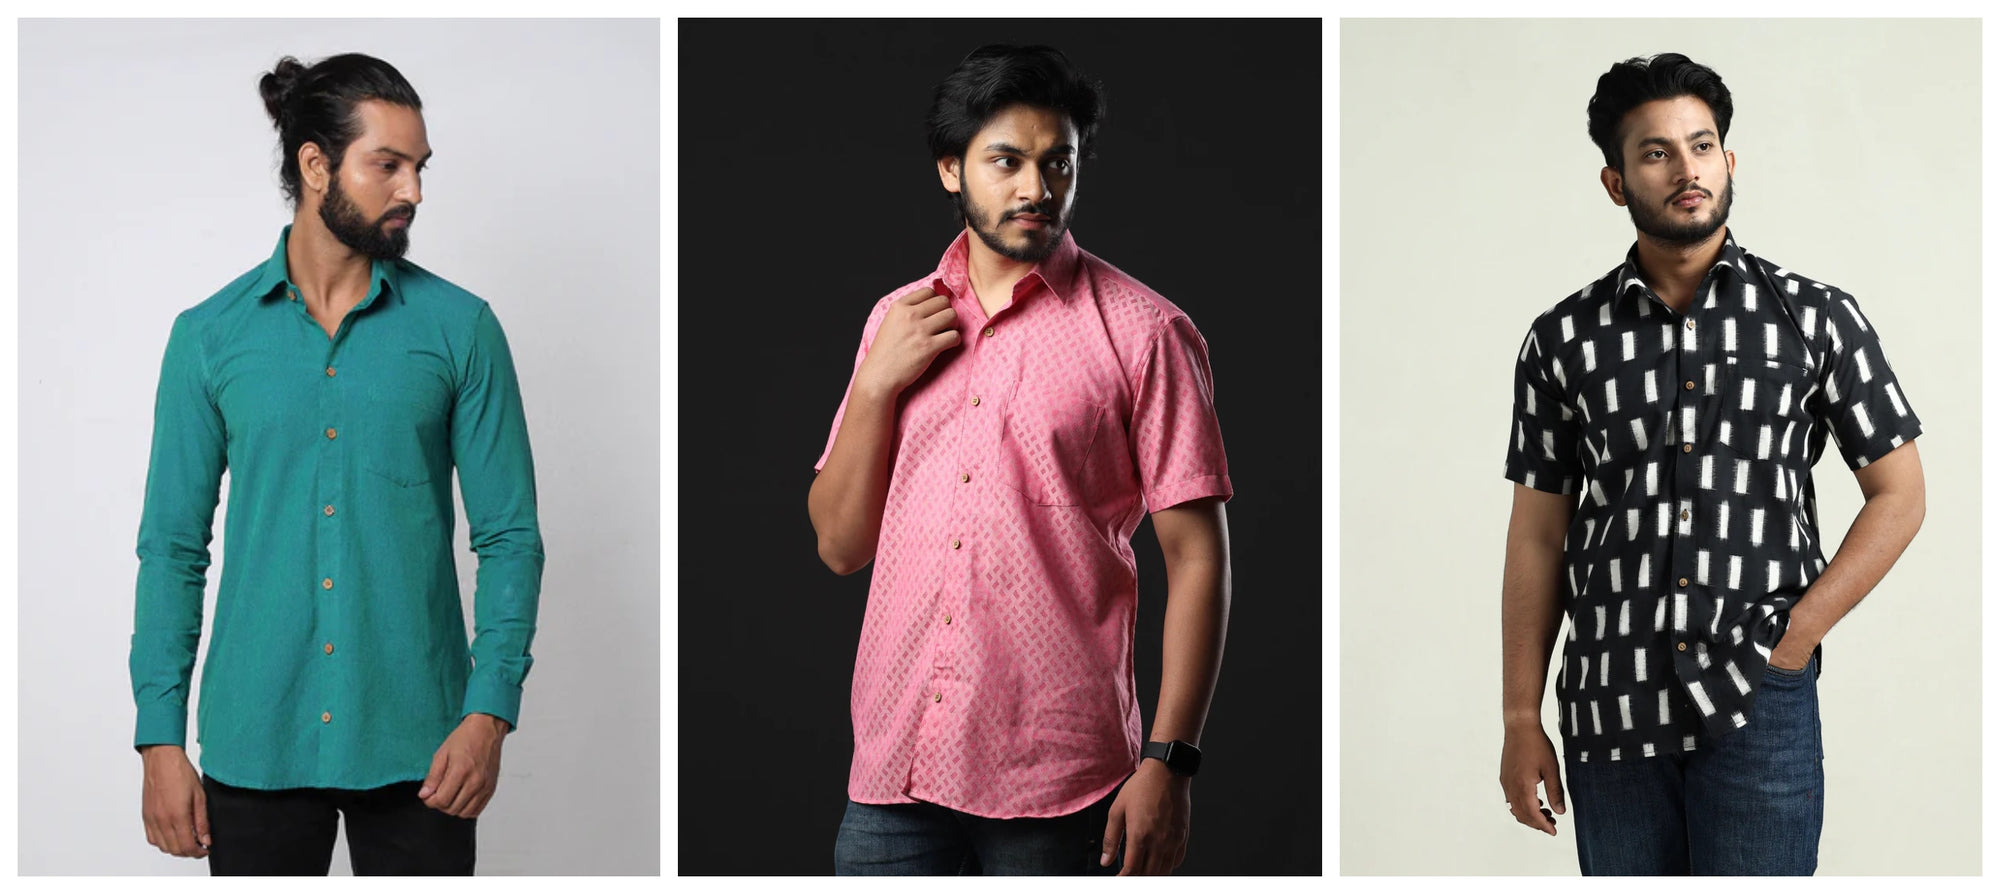 Handloom Shirts for Every Occasion: Casual Days, Formal Events, and Everything In Between